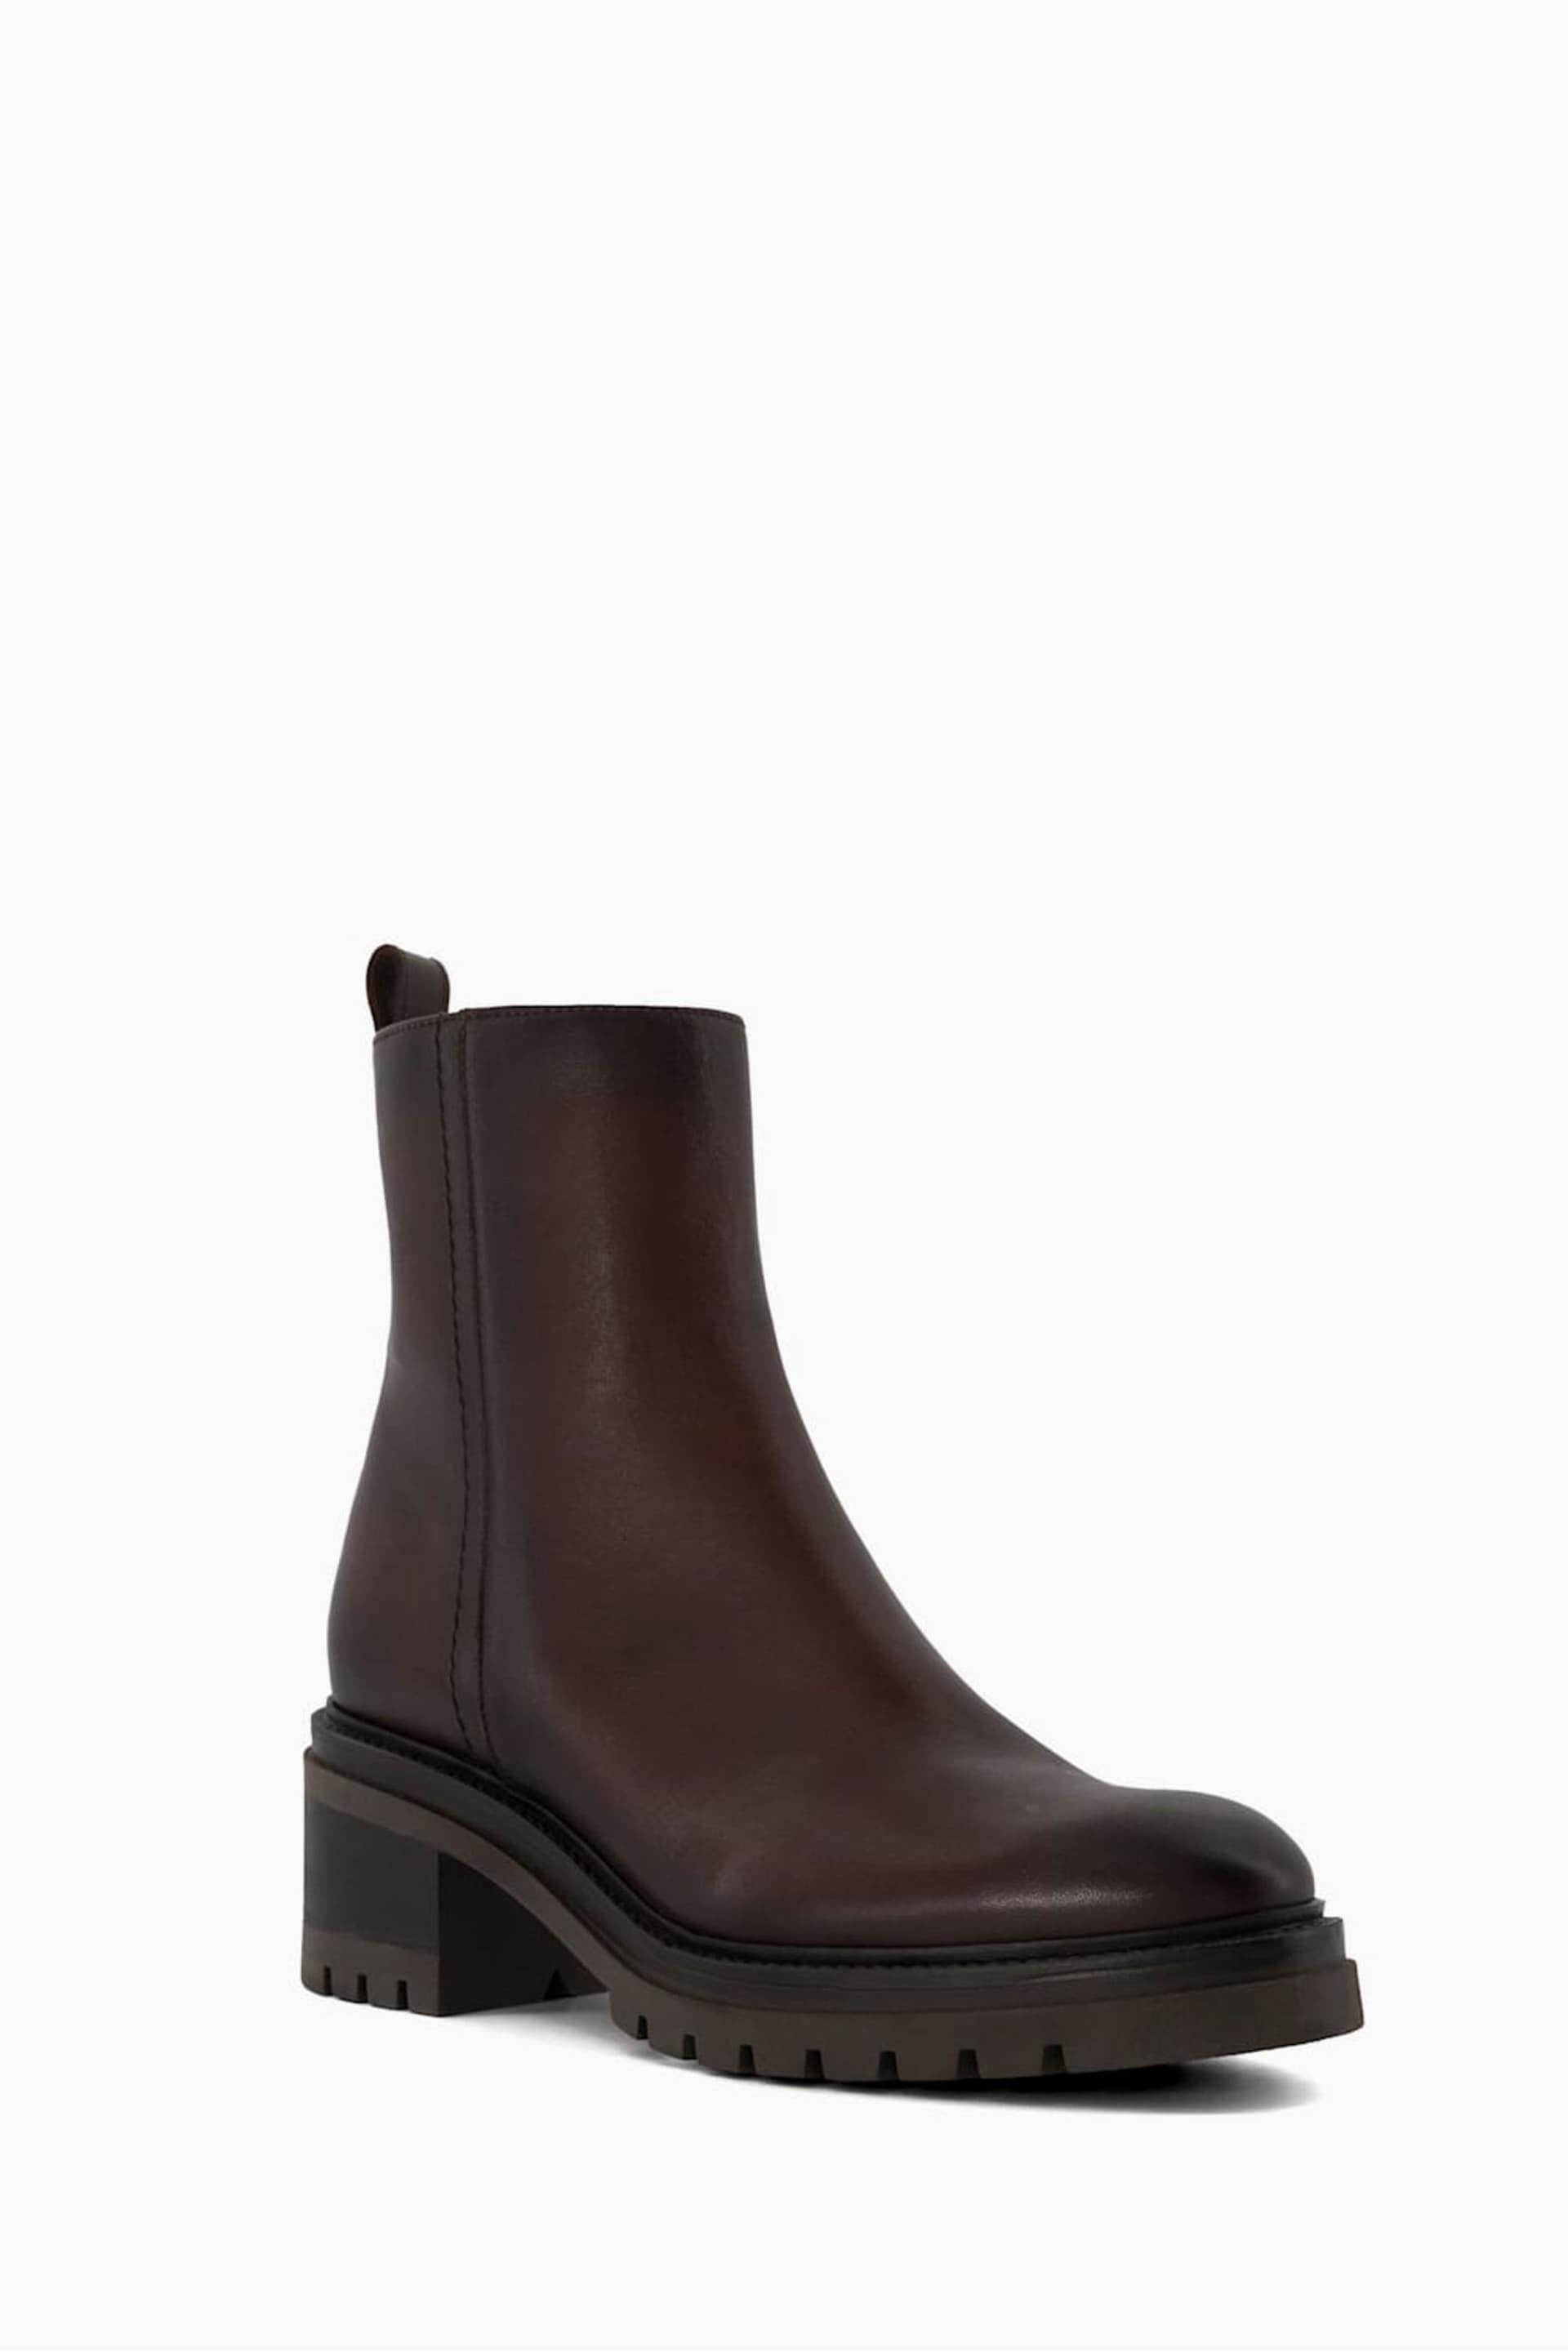 Dune London Brown Possessive Cleated Heel Plain Ankle Boots - Image 3 of 6